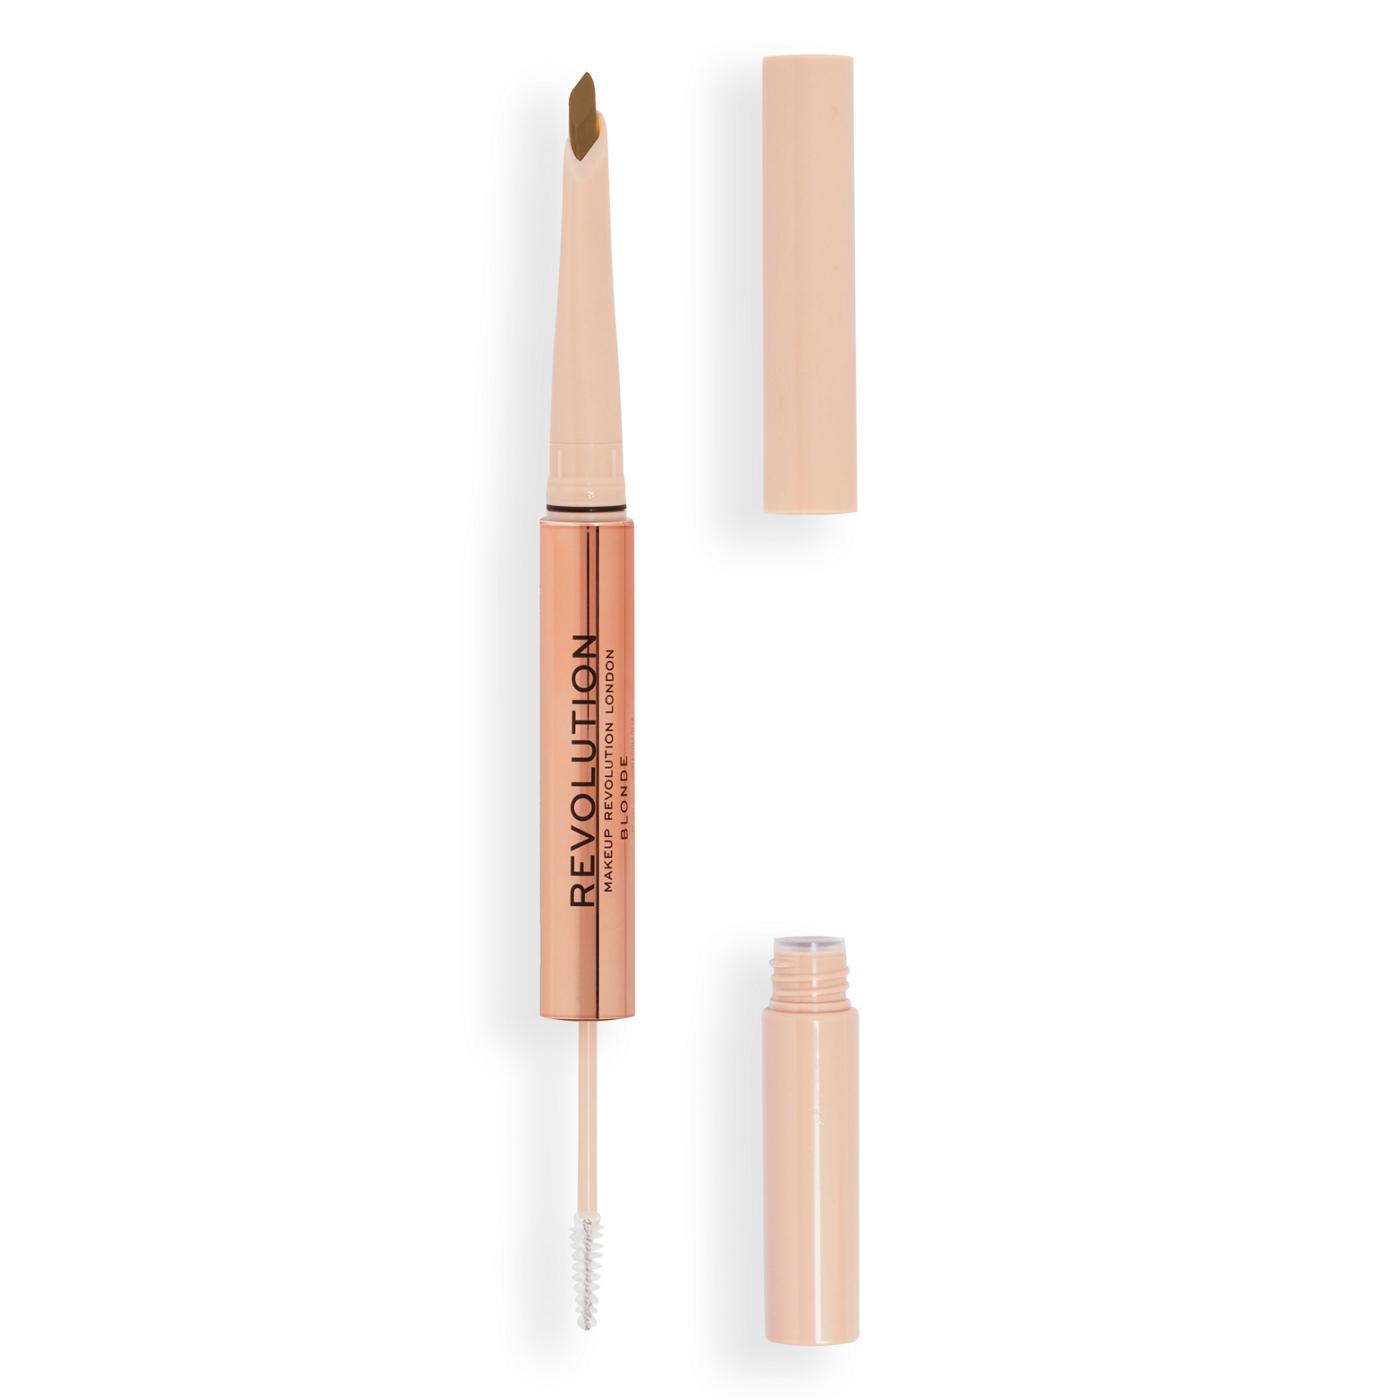 Makeup Revolution Fluffy Brow Duo Pencil - Blonde; image 2 of 4